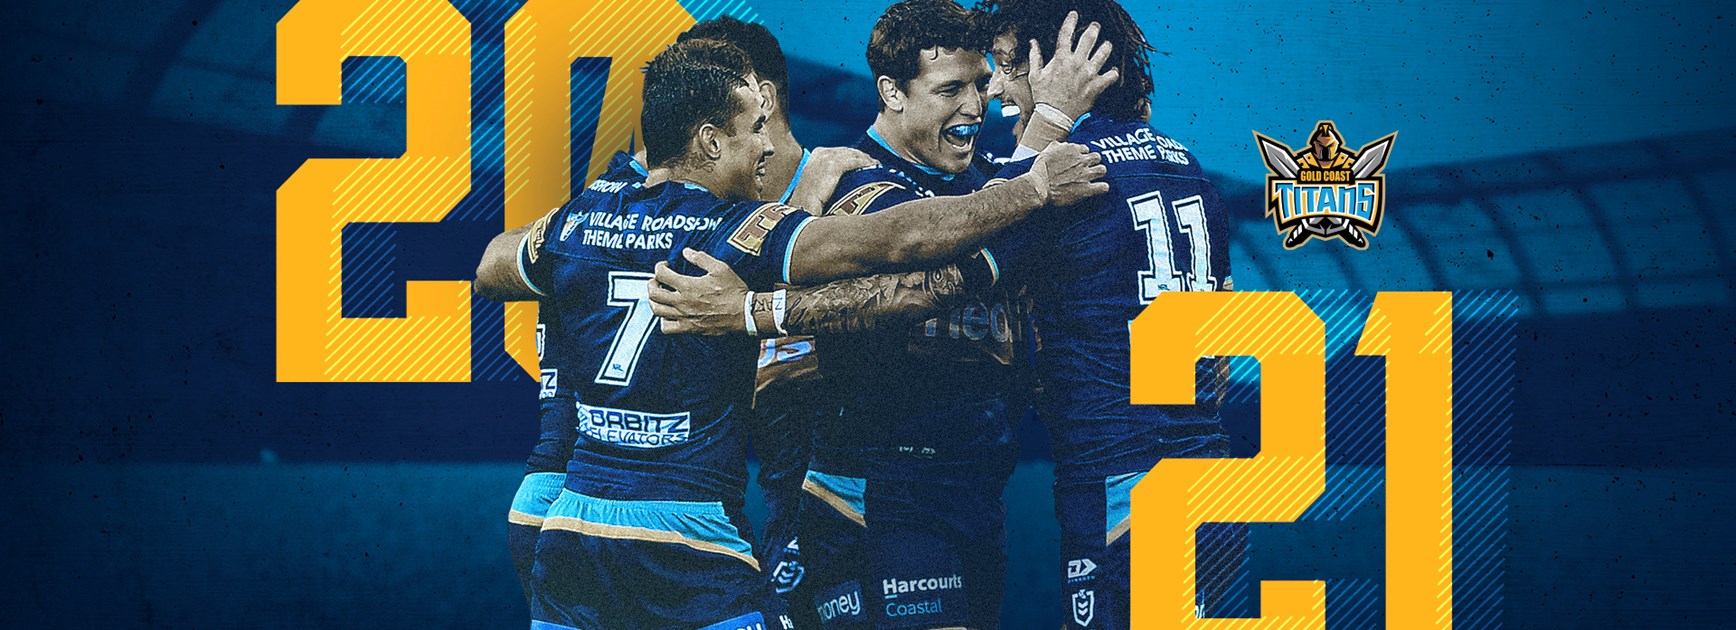 Titans 2021 Membership is on sale now